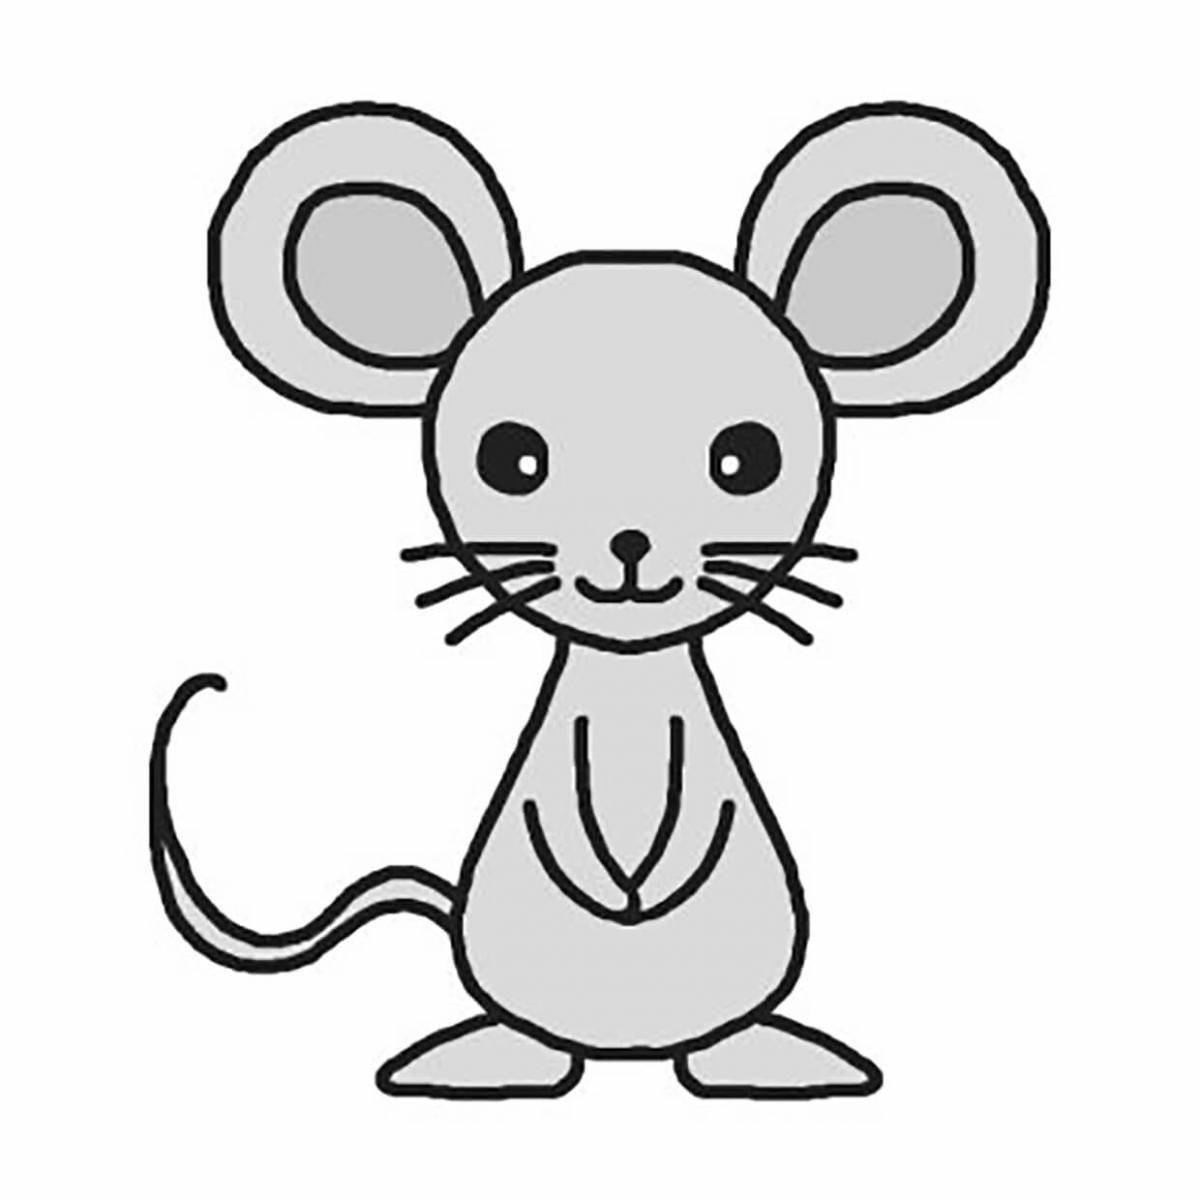 Zani mouse coloring book for children 3-4 years old